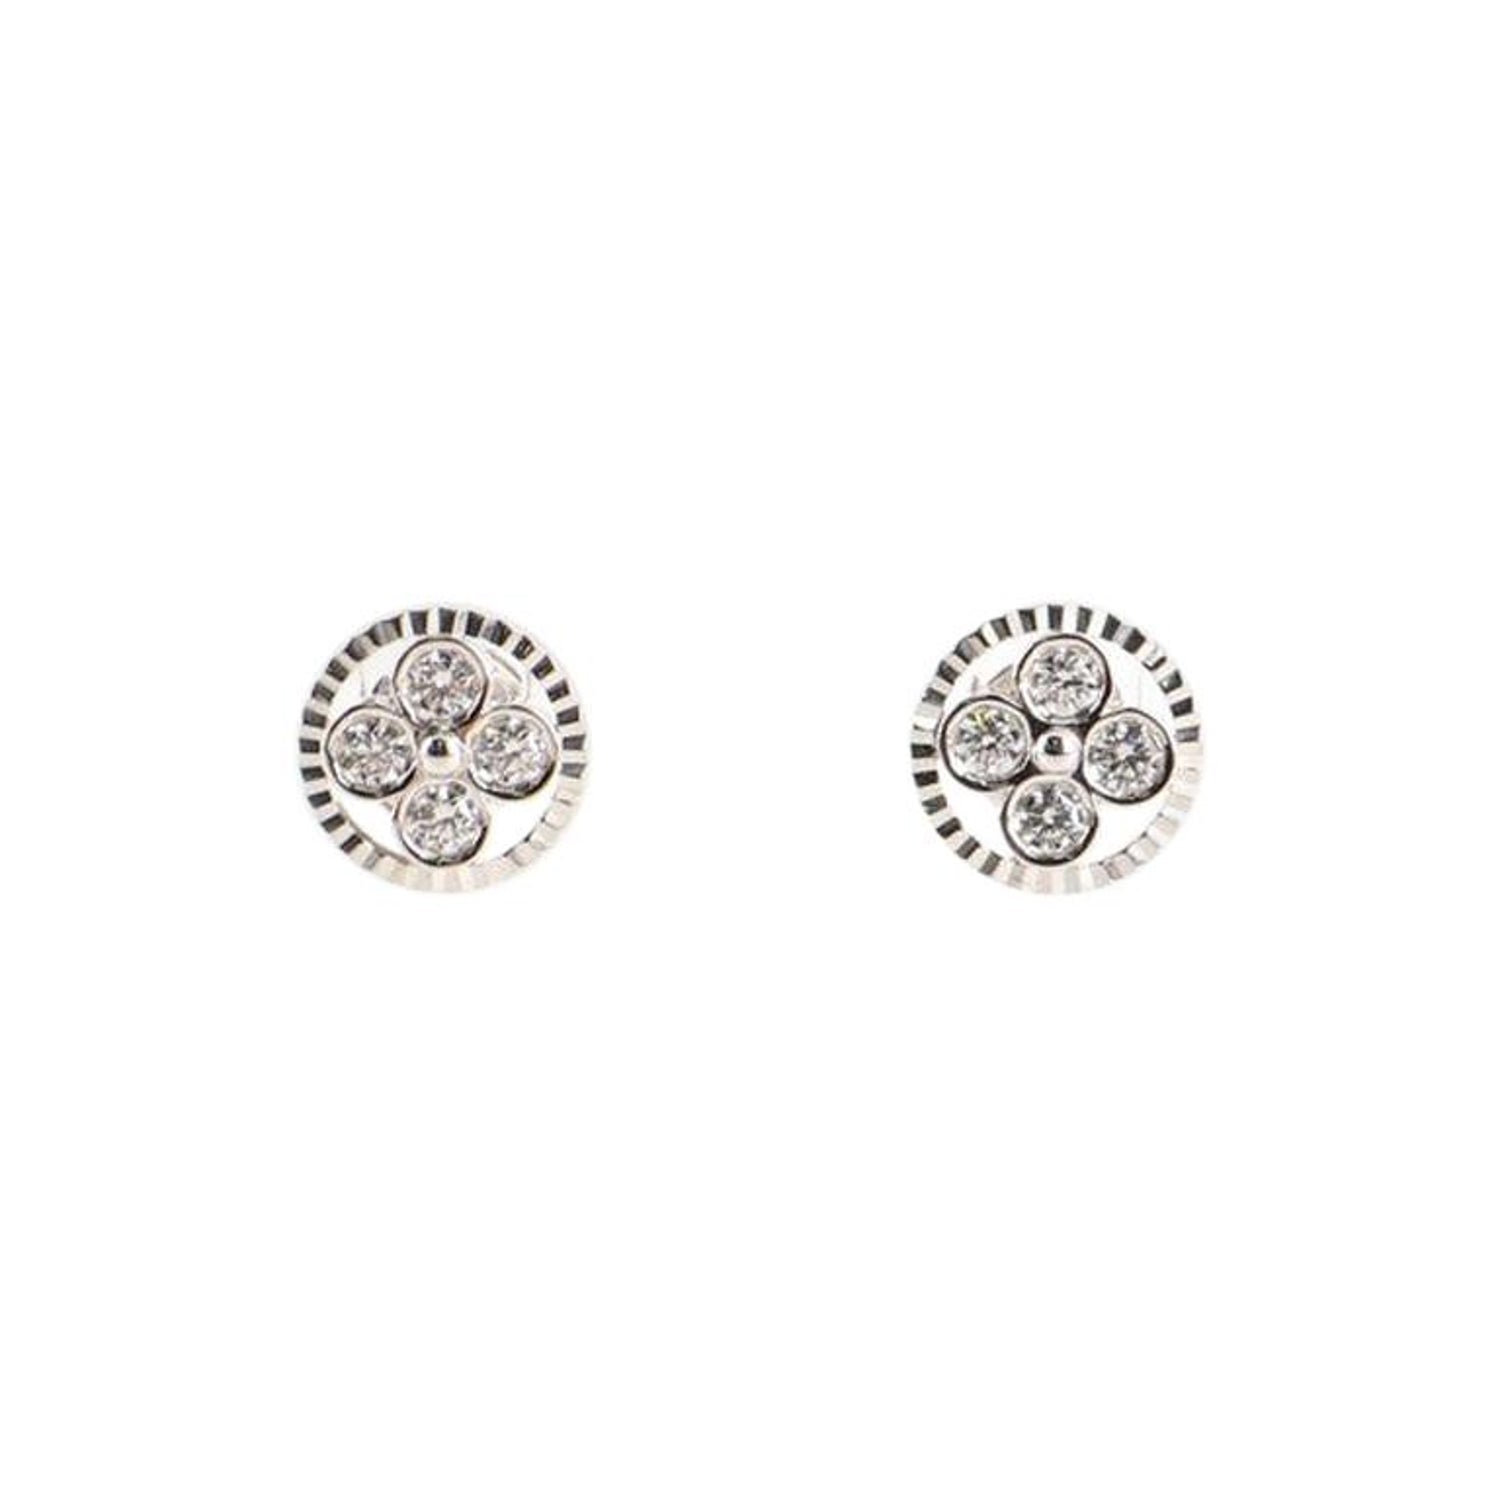 Sold at Auction: Louis Vuitton 18k Gold Diamond MOP Color Blossom Earrings